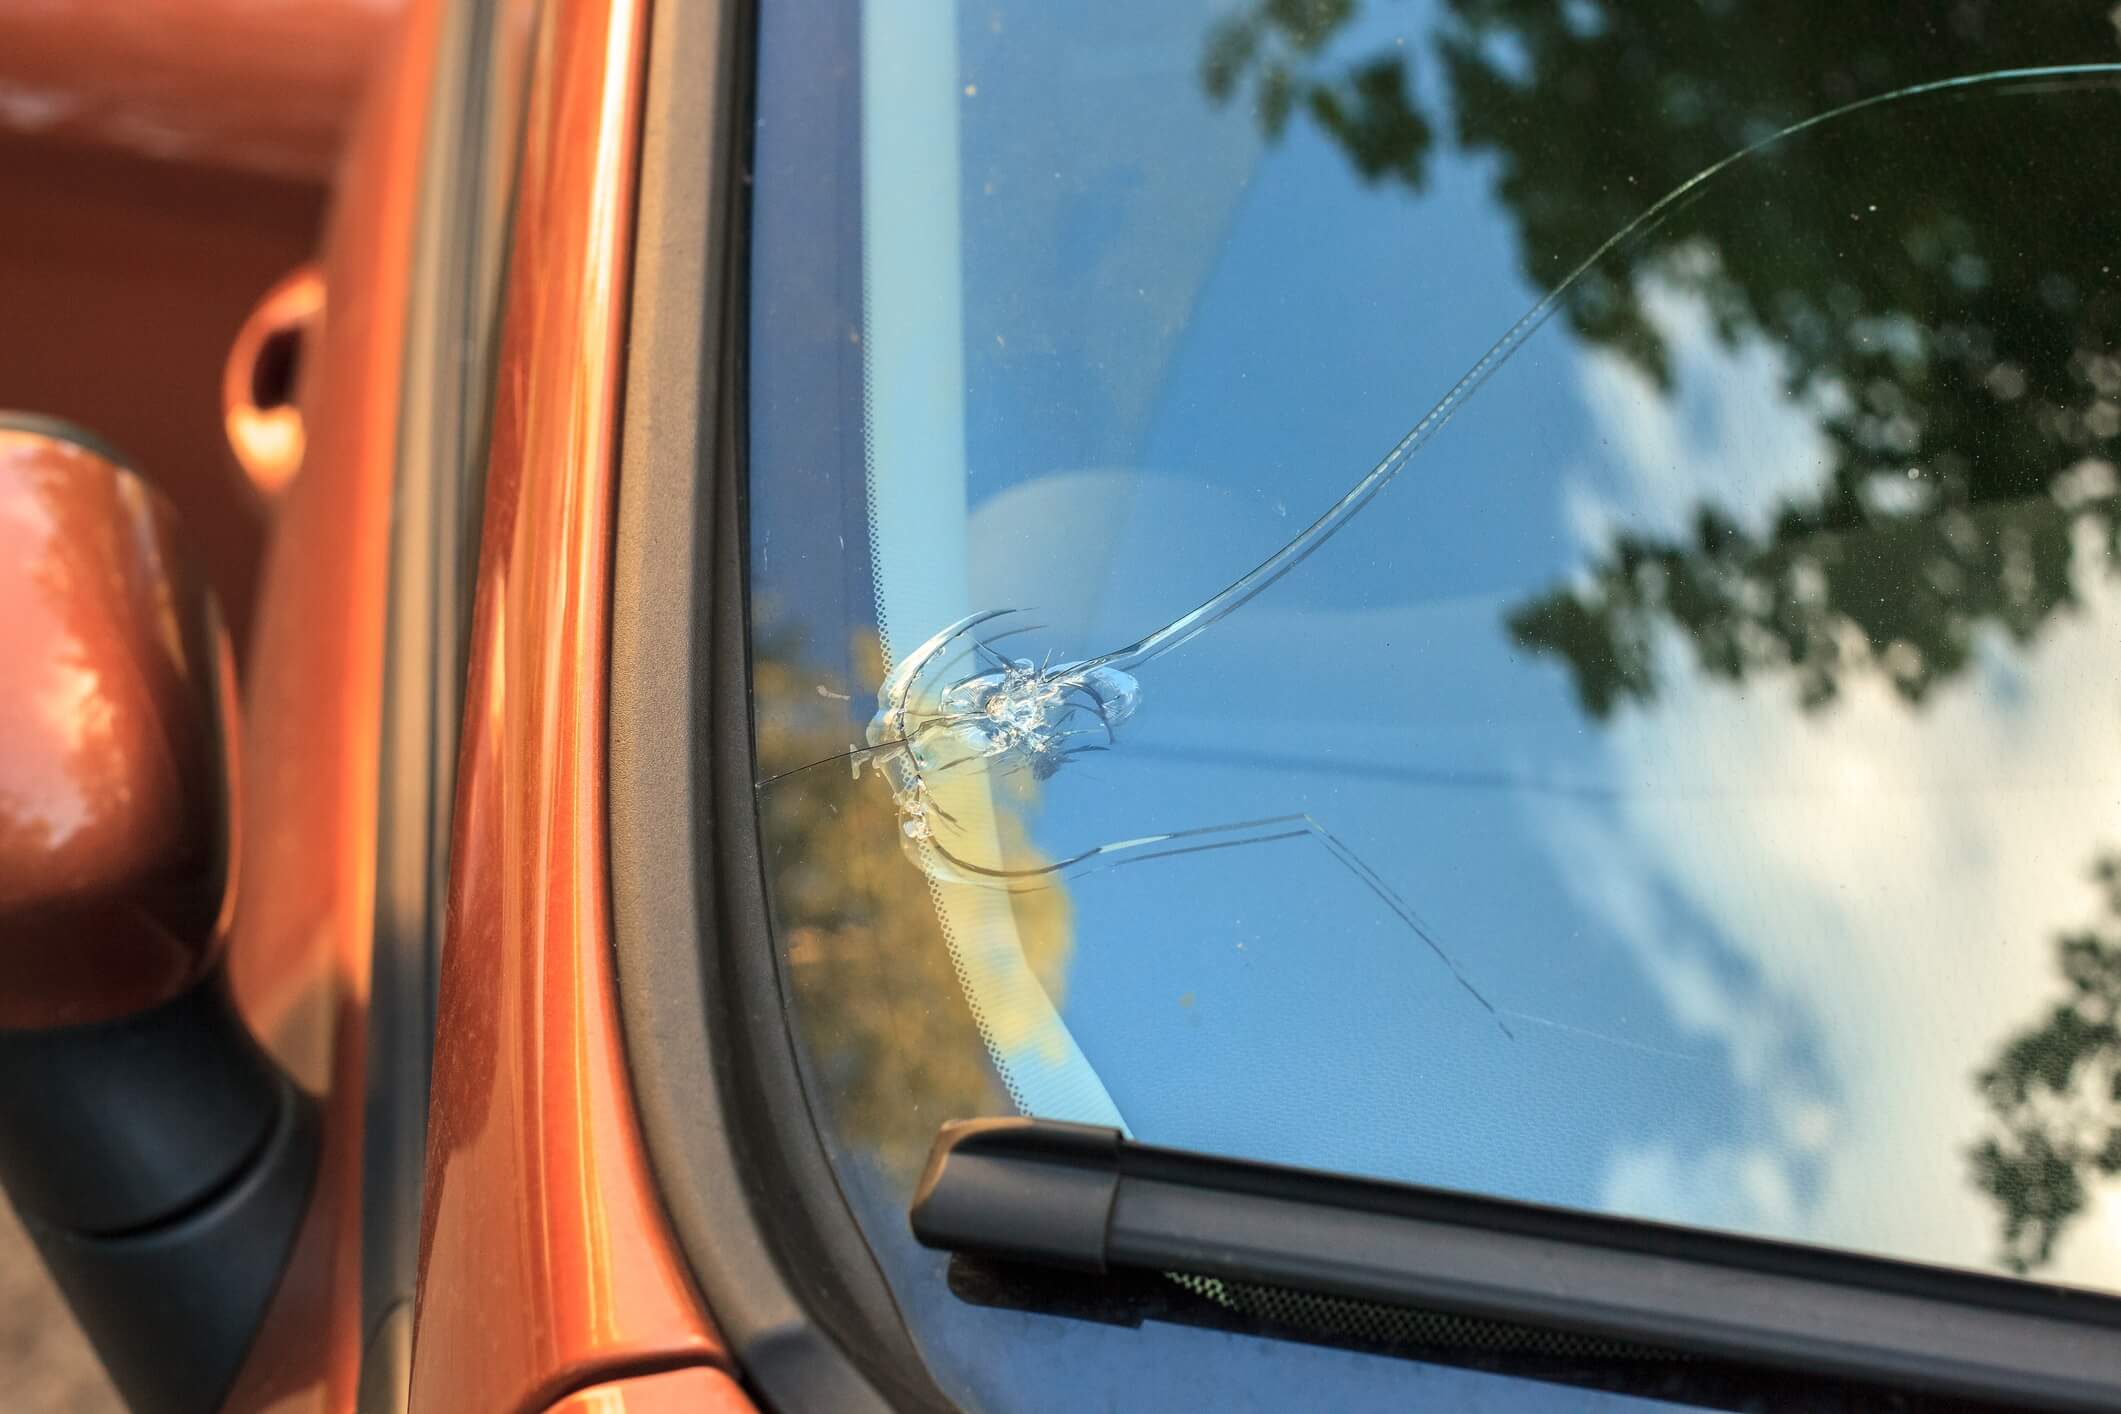 Cracked Windshield on a Leased Car